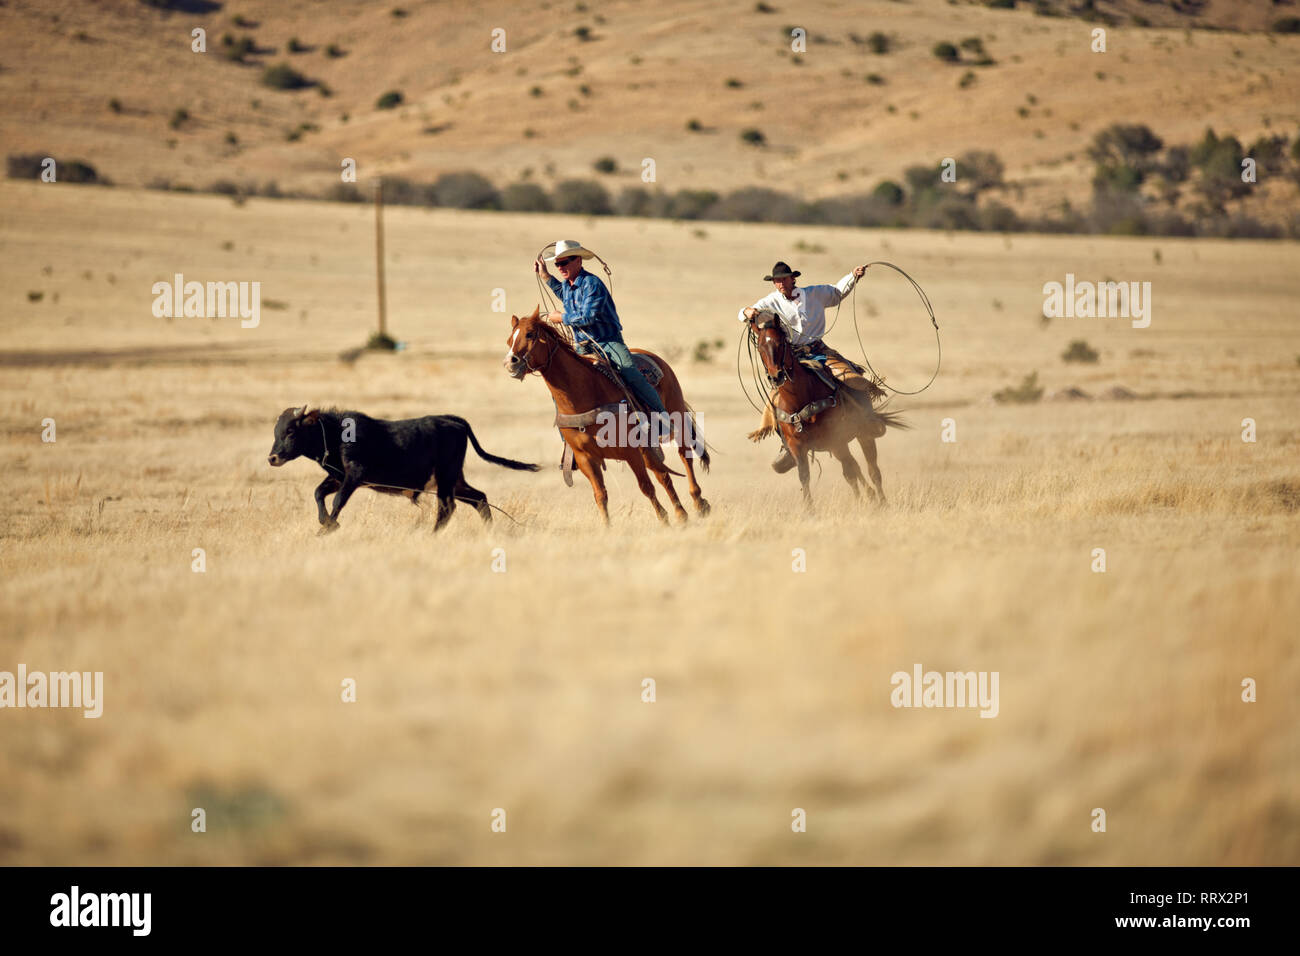 Two ranchers on horses pursing a cow. Stock Photo